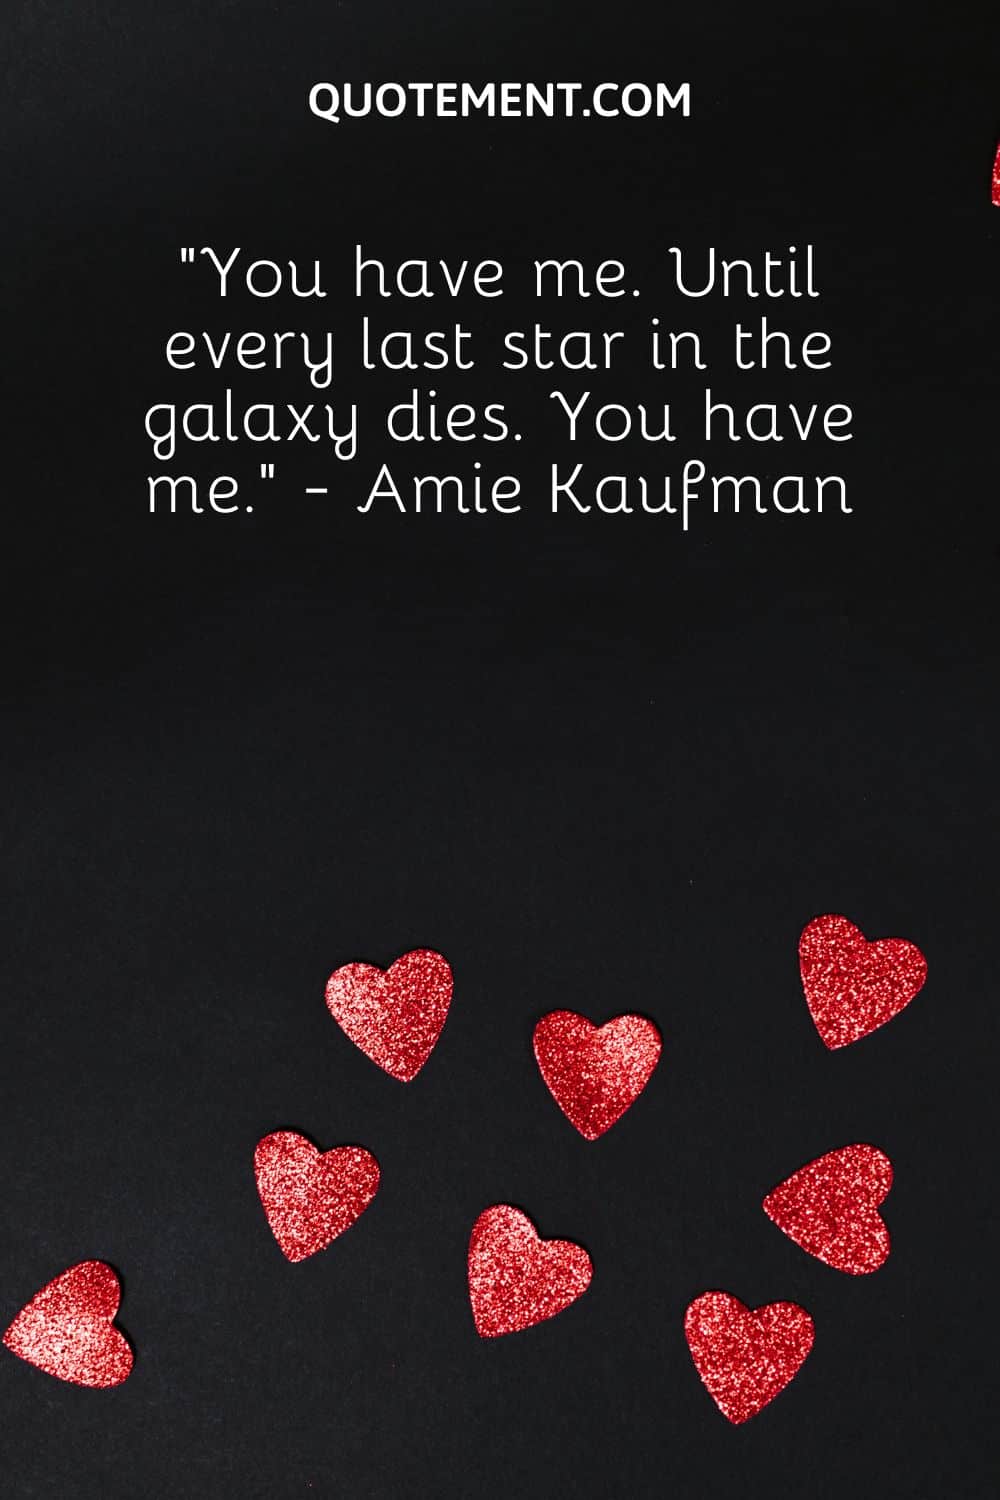 “You have me. Until every last star in the galaxy dies. You have me.” - Amie Kaufman